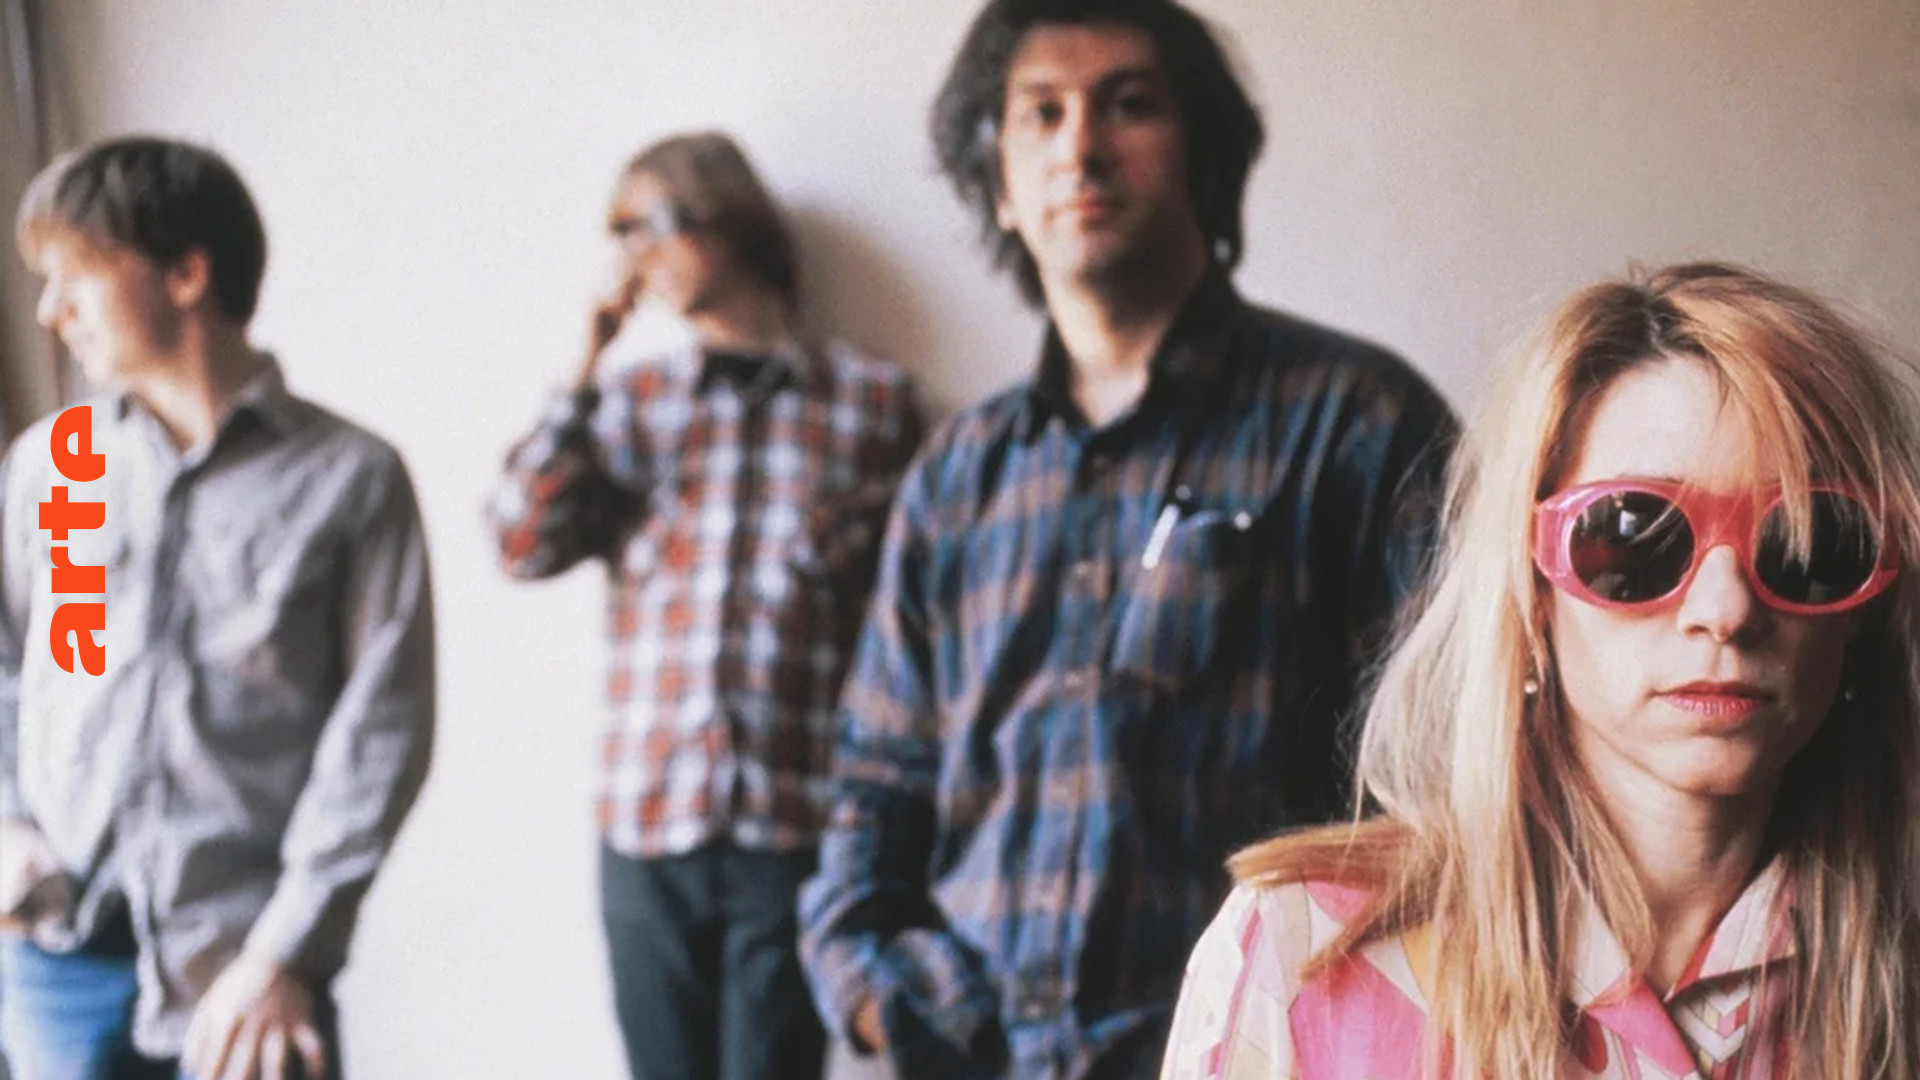 Blow up - Sonic Youth im Film